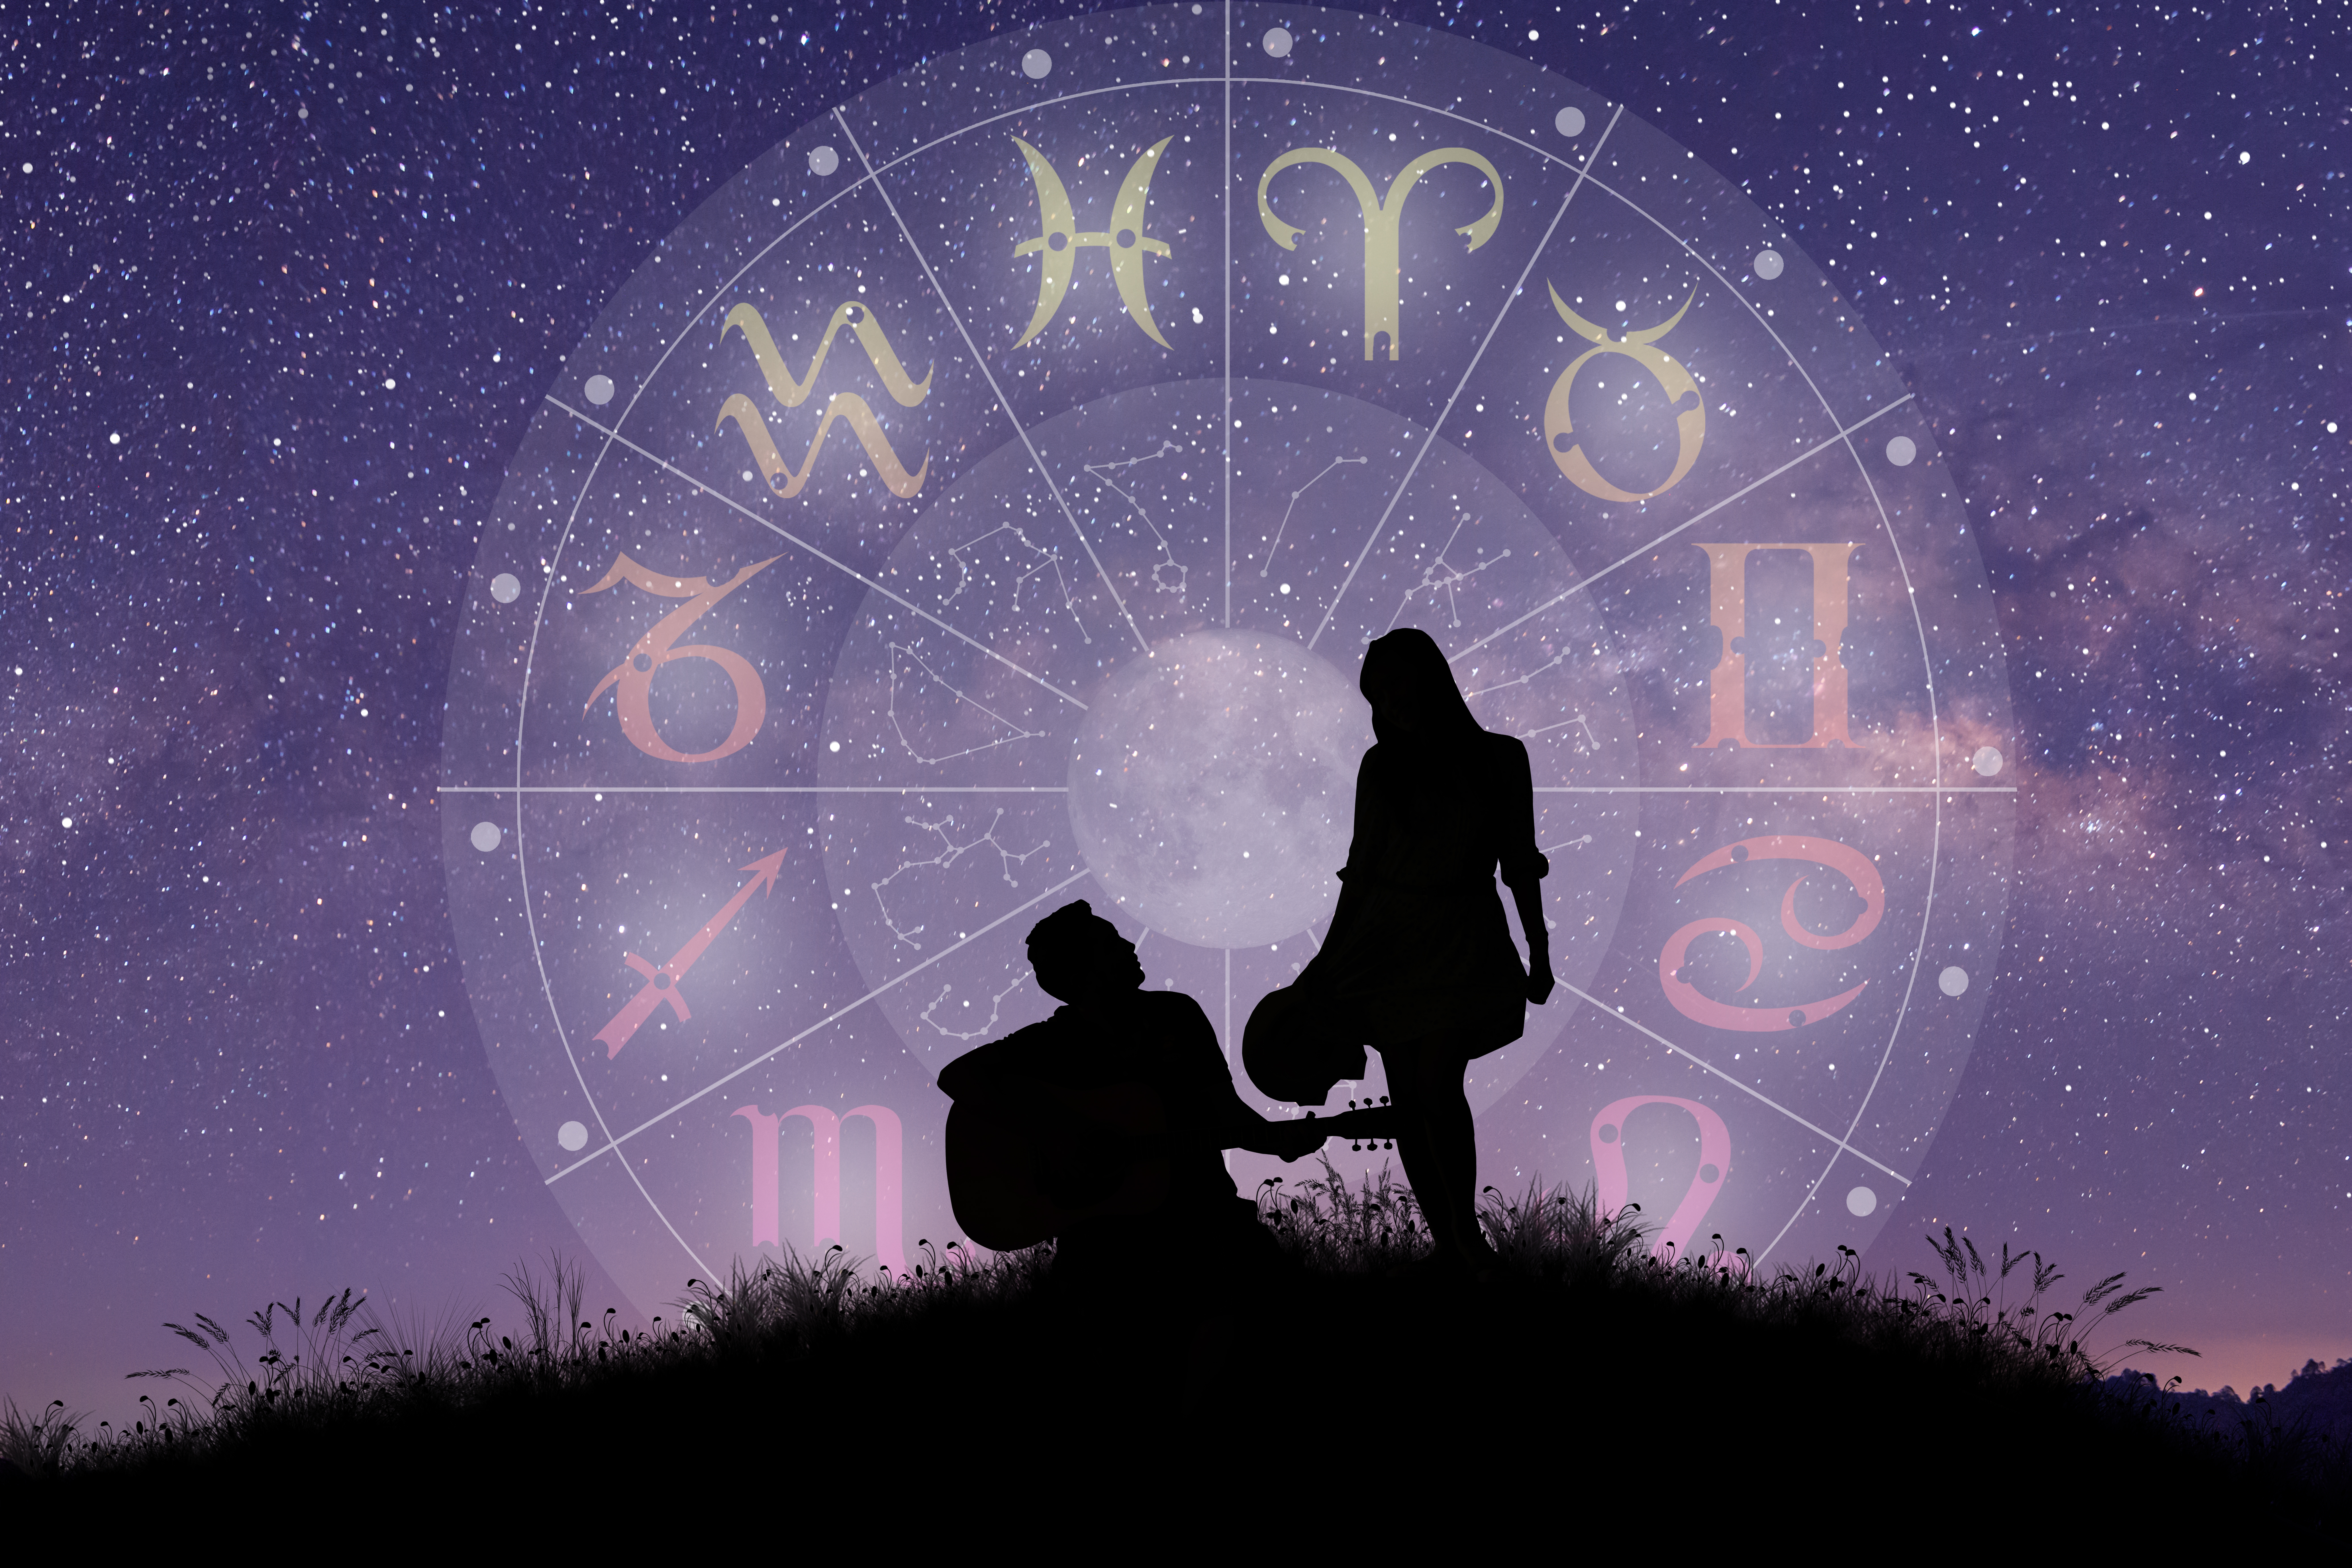 Silhouettes of a couple in front of a night sky and zodiac wheel, one of them is knelt on the floor playing guitar